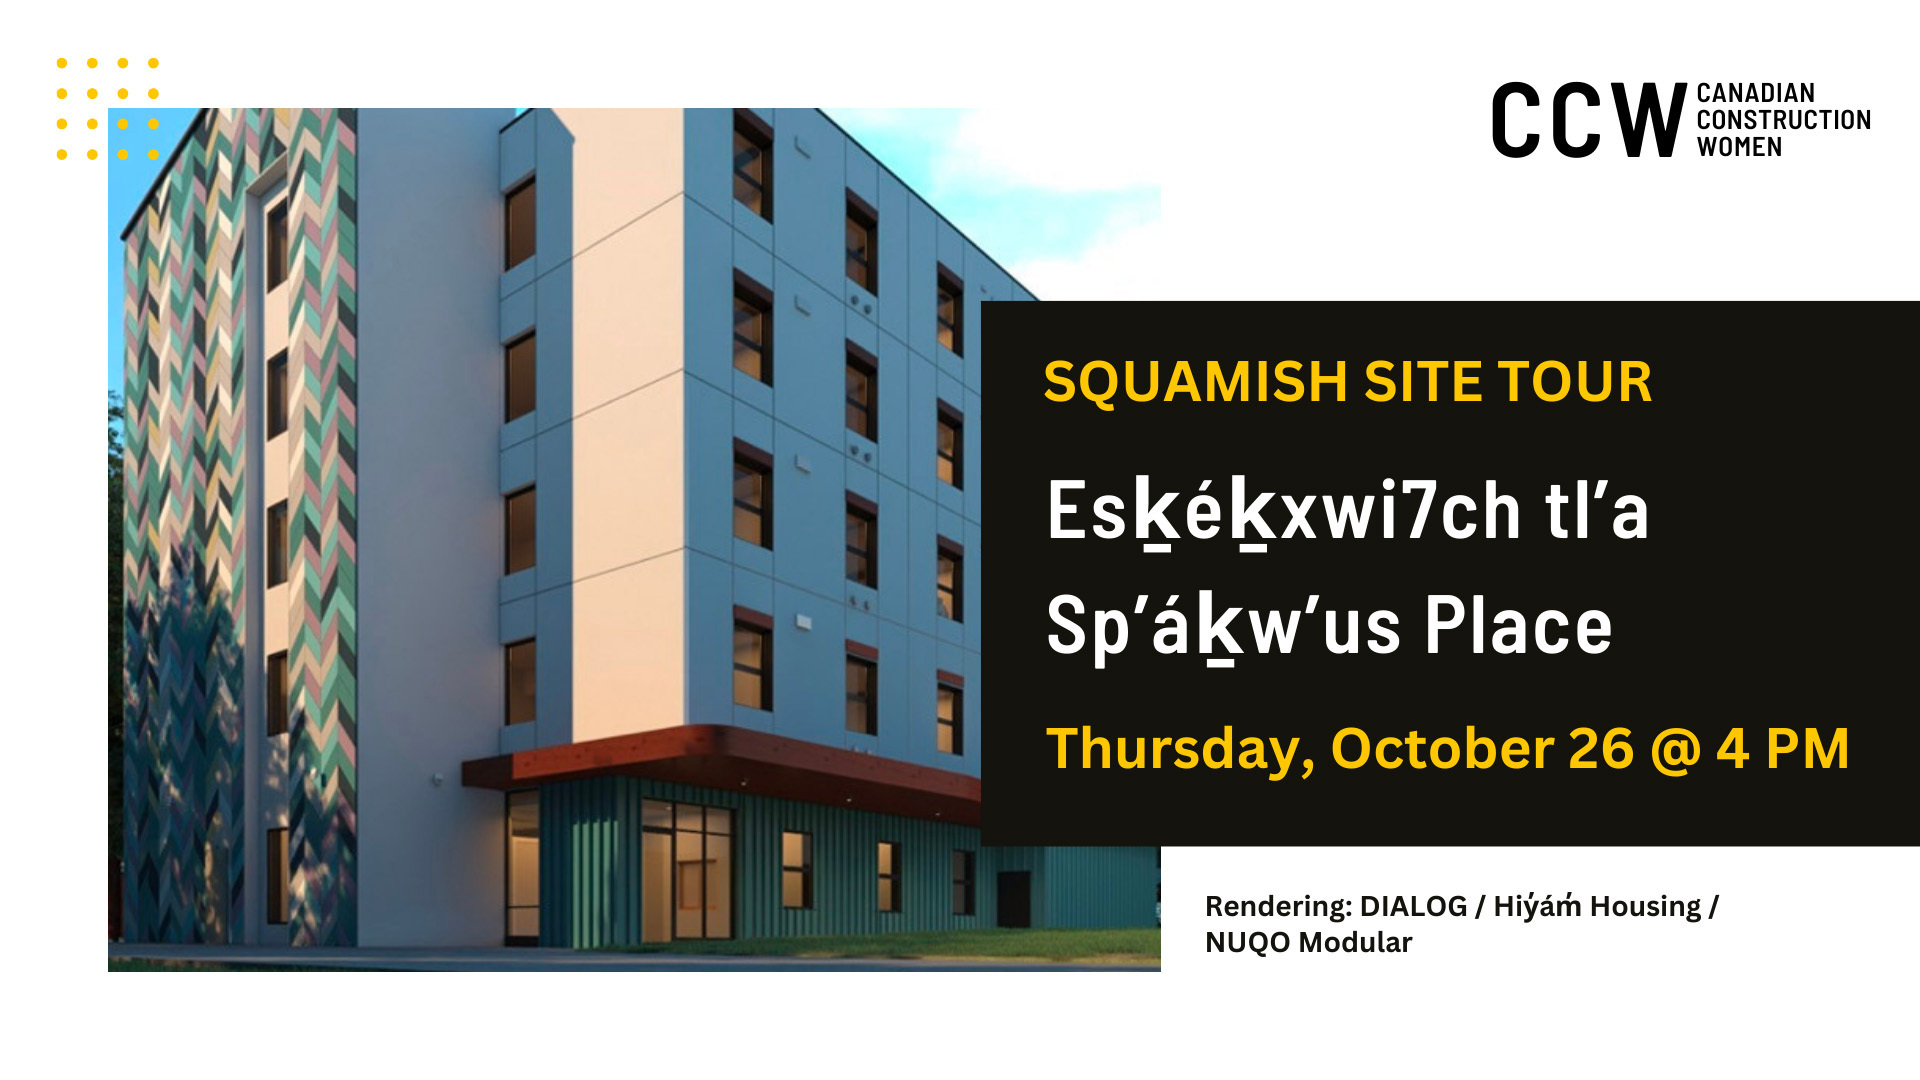 Modular Building Site Tour - Eskekxwi7ch tl'a Sp'akw'us Place - Oct. 26, Squamish, British Columbia, Canada